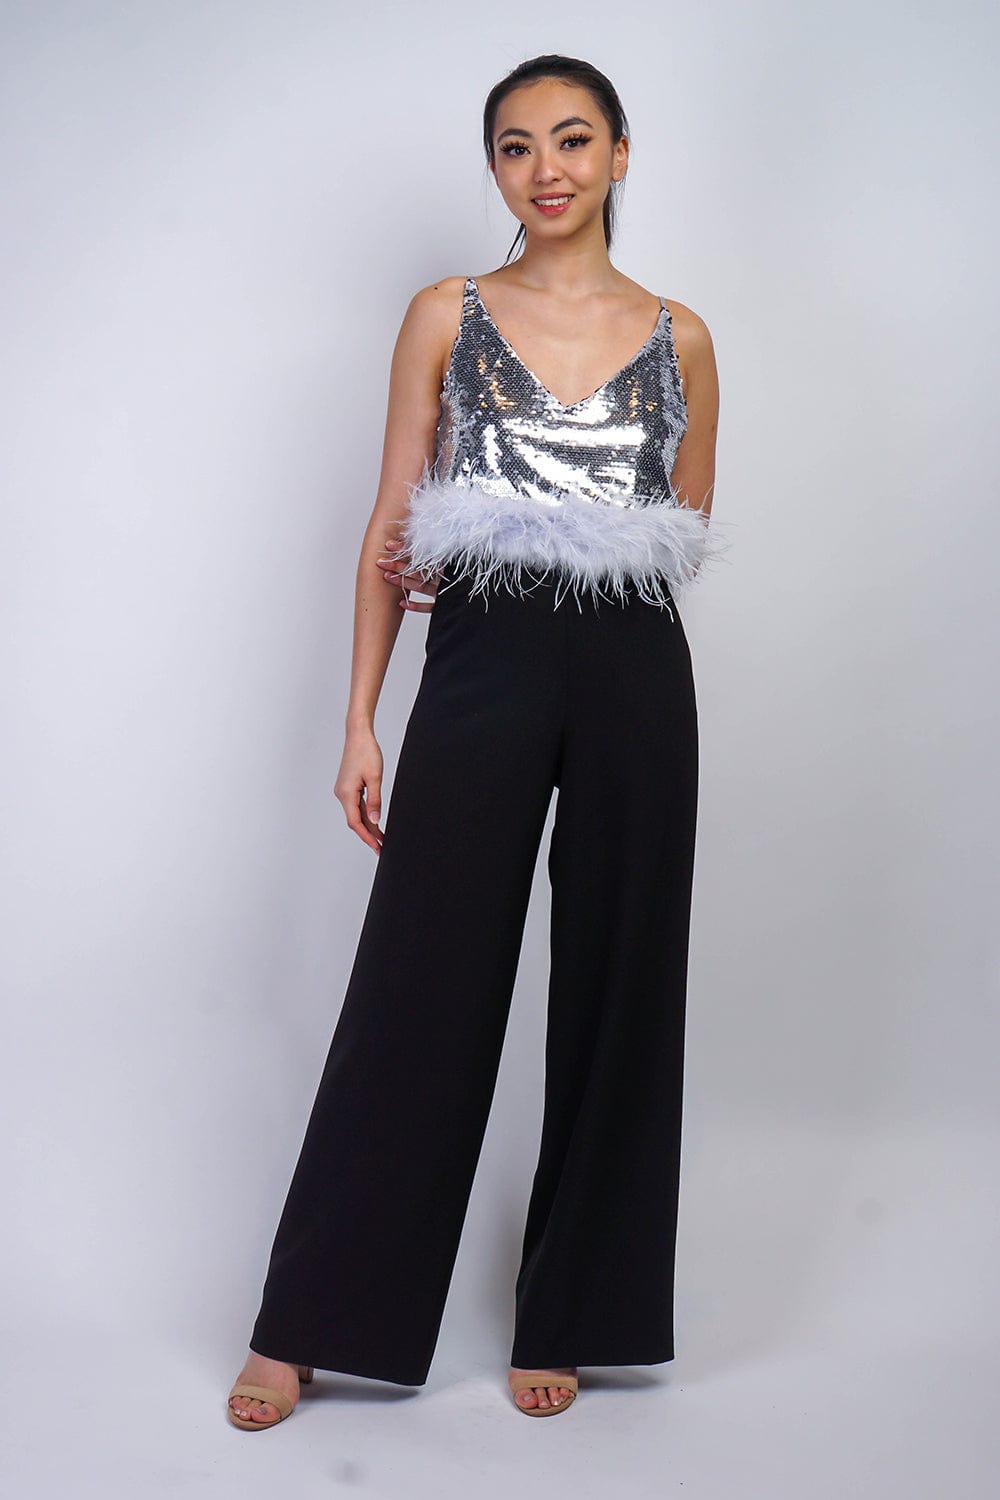 TOPS Silver Sequin Feather Top - Chloe Dao